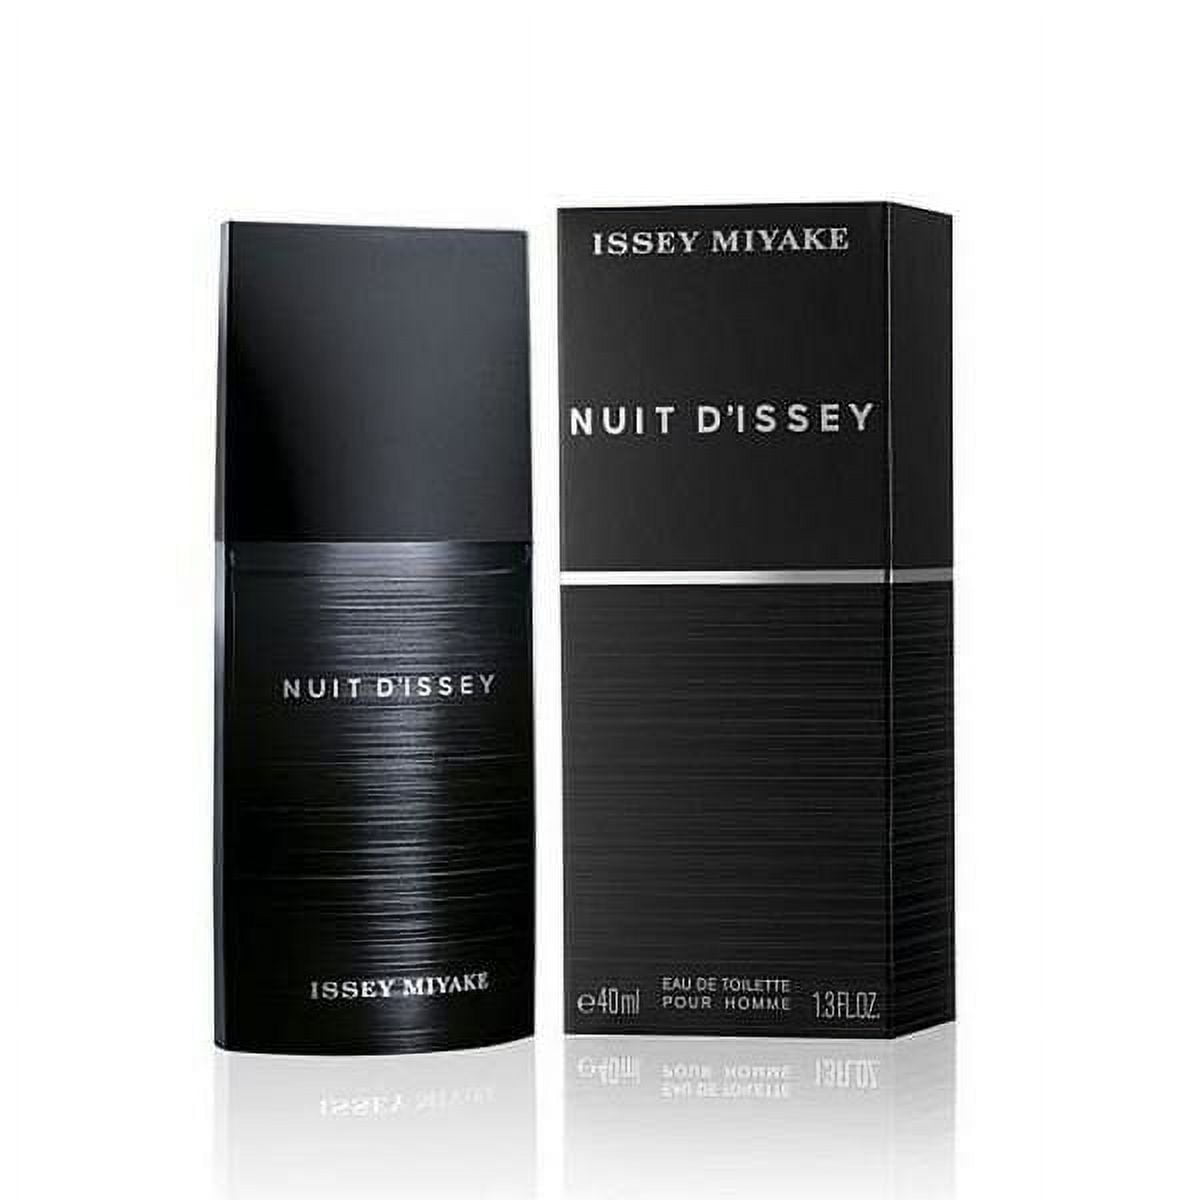 Nuit D'issey by Issey Miyake Eau De Toilette Pour Homme 1.3oz Spray New ...